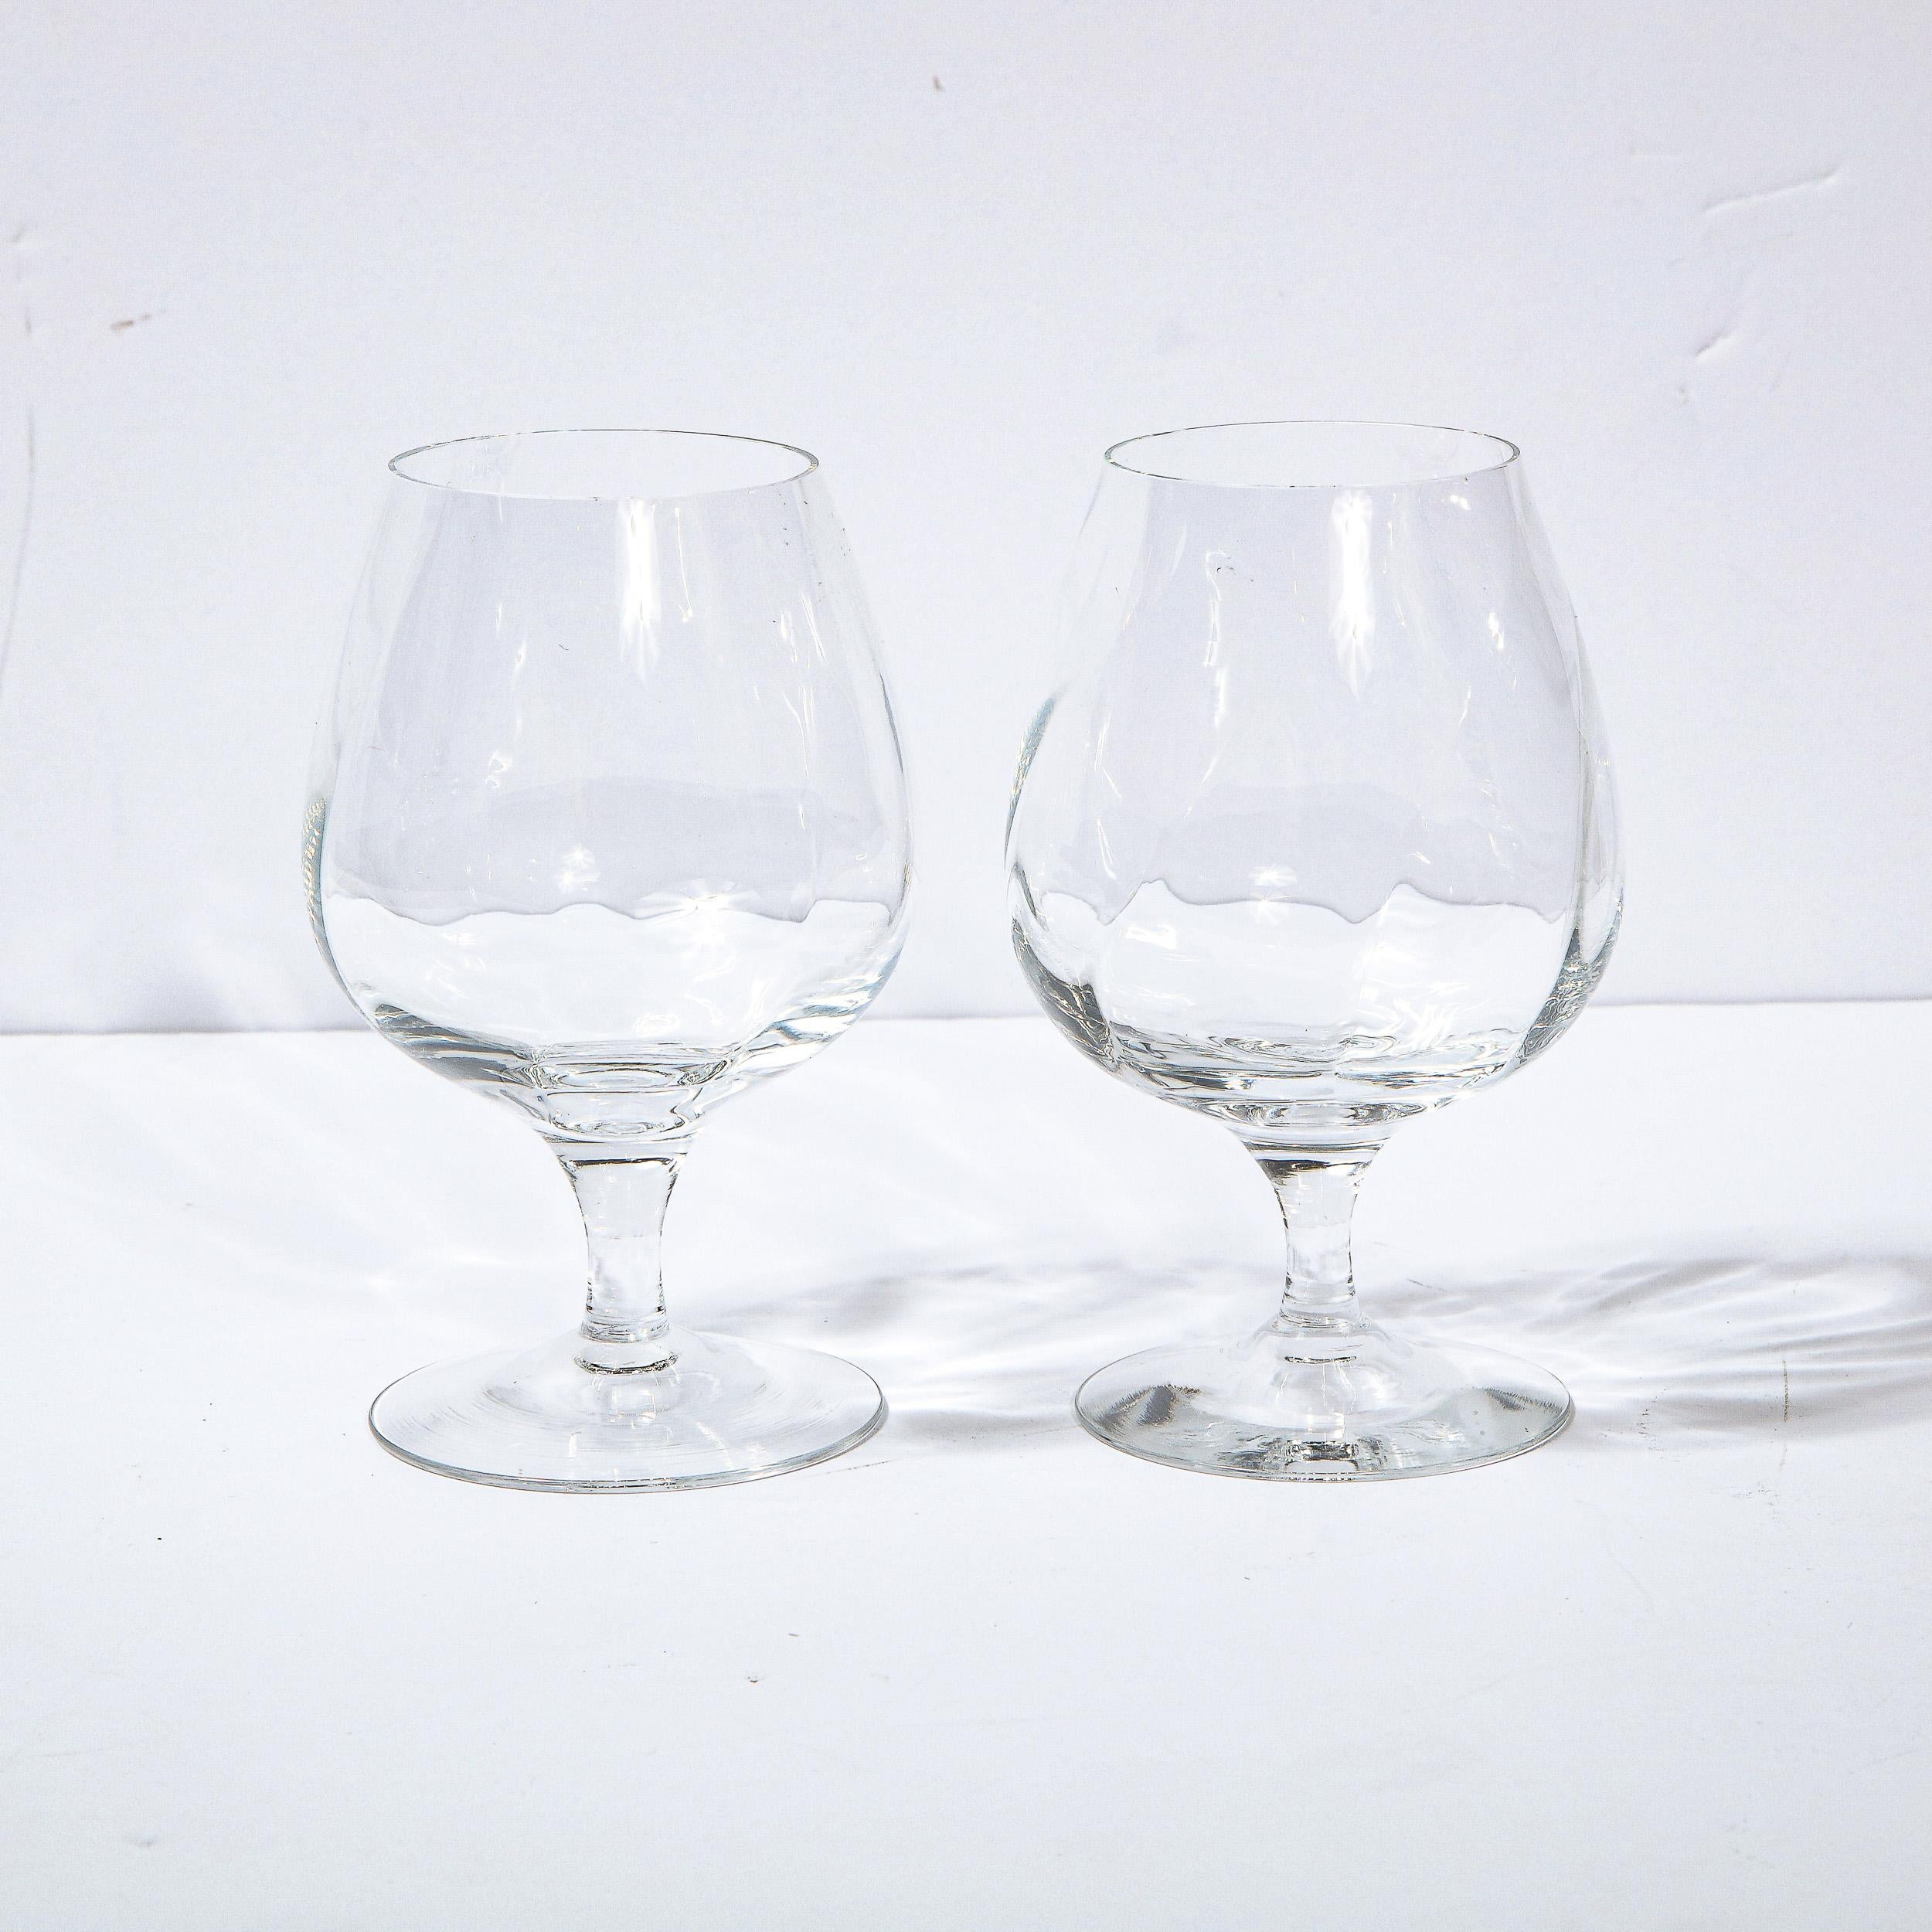 This stunning set of four brandy snifters were realized by the fabled American company Tiffany & Co. They feature circular bases; cylindrical stems (that flare slightly at their apex); and rounded bodies with subtle channeling detailing at a slight